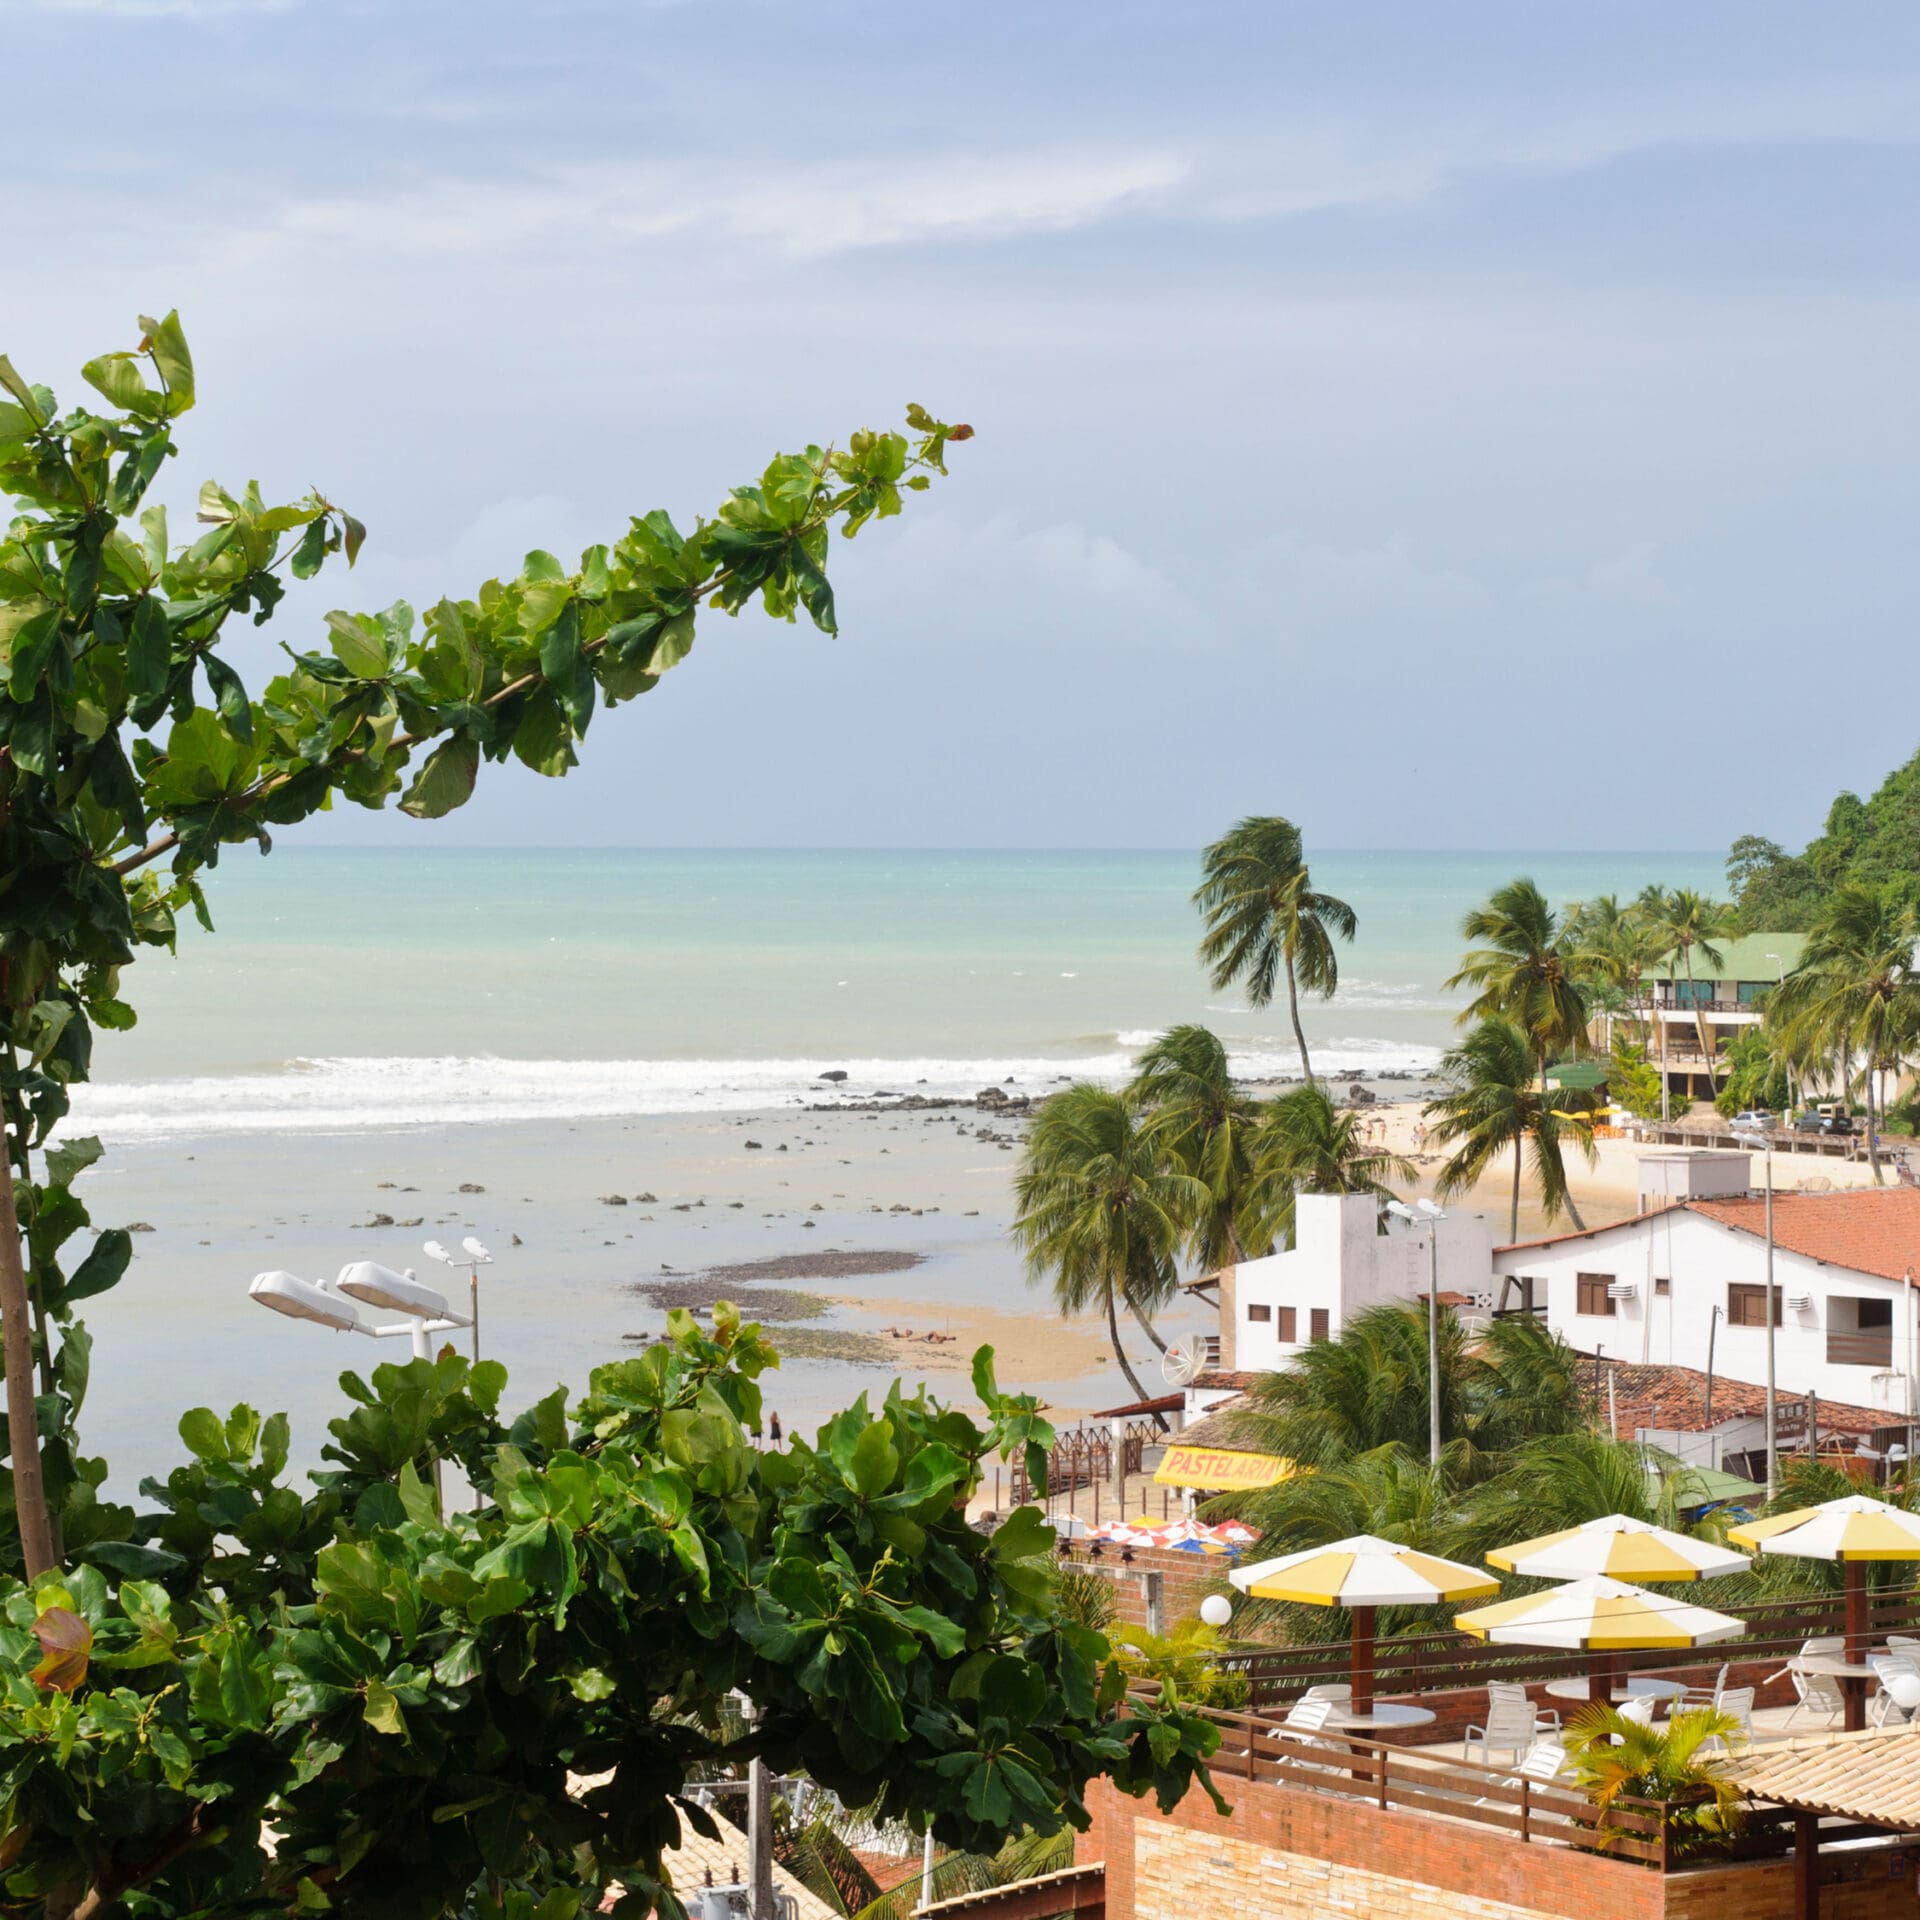 Pipa Beach, Brazil, where NomadX is opening a new digital nomad village